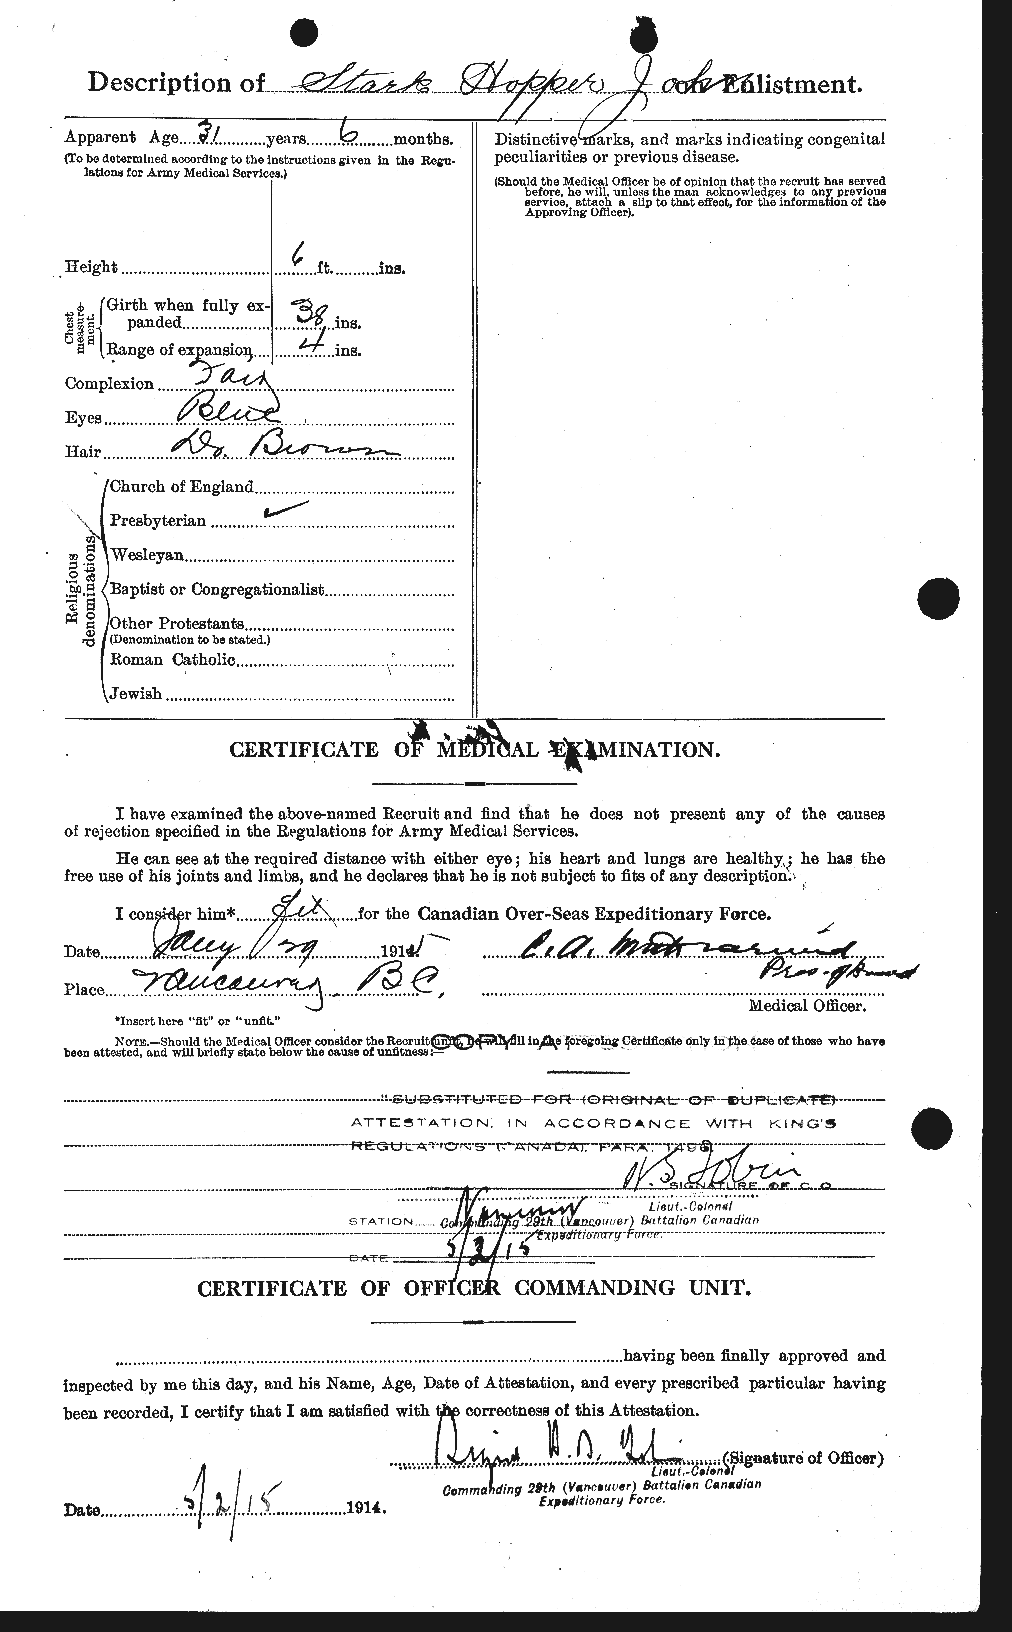 Personnel Records of the First World War - CEF 622746b